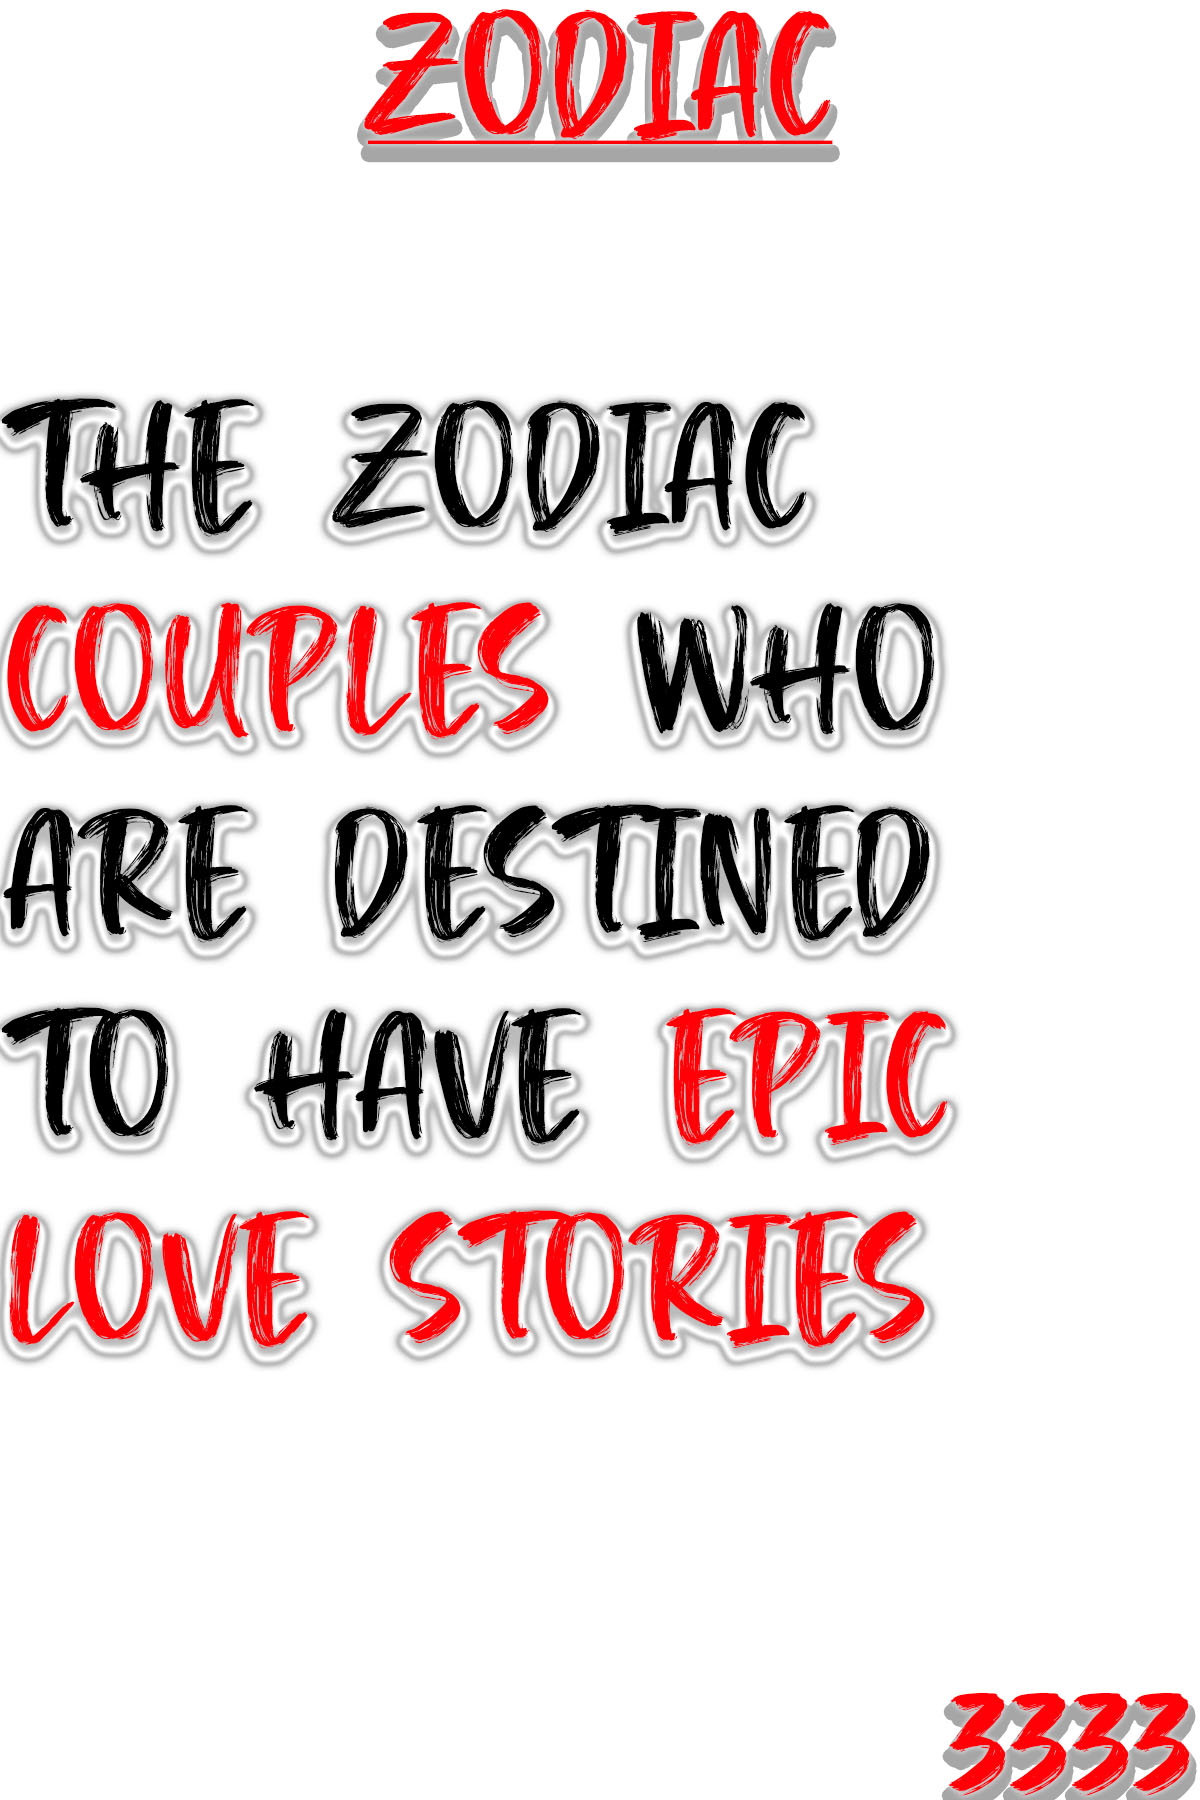 The Zodiac Couples Who Are Destined to Have Epic Love Stories